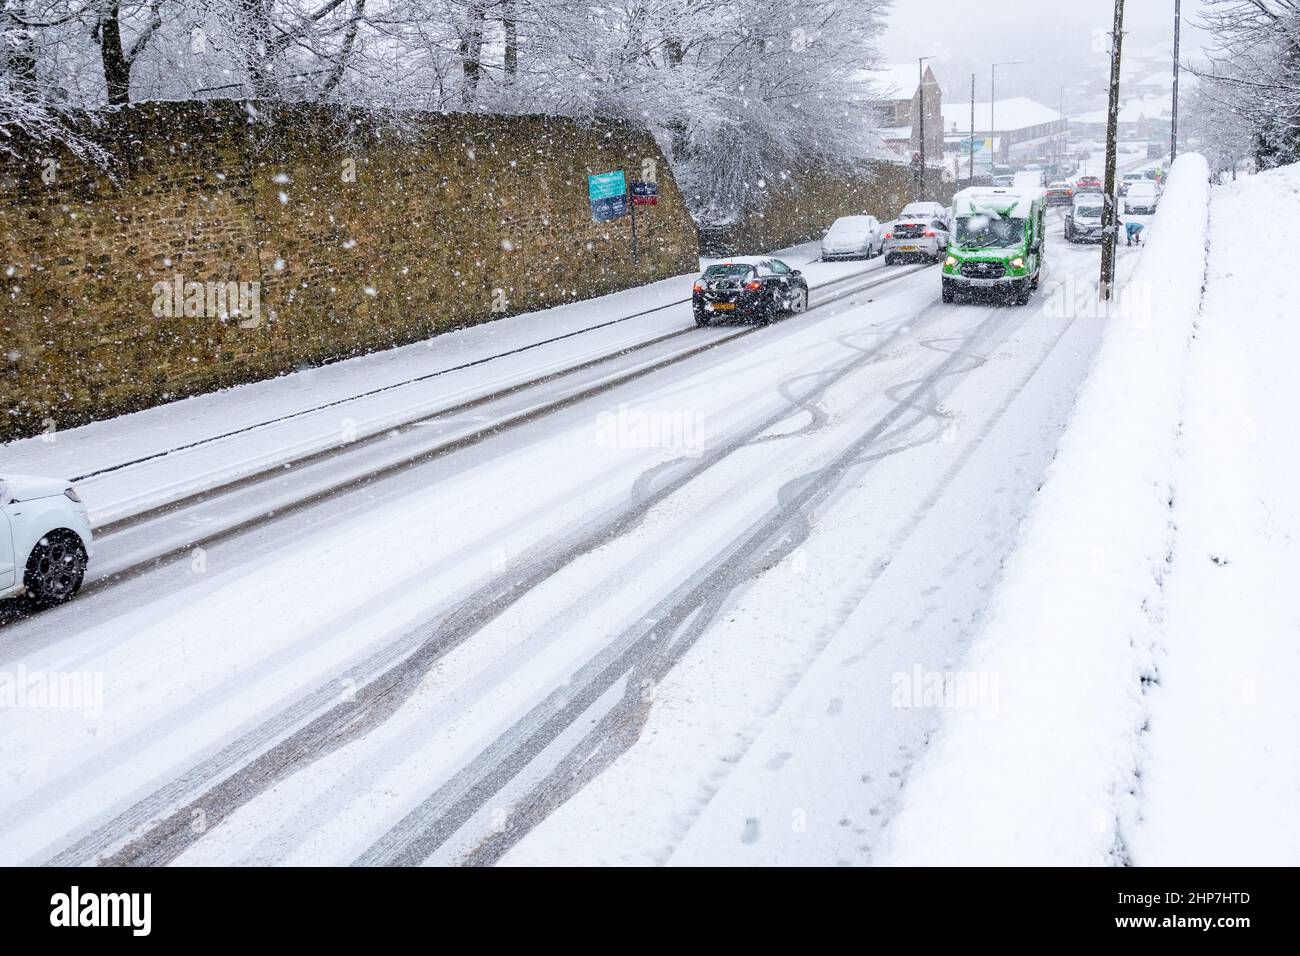 Snow and ice causing disruption on the hills around Bradford, West Yorkshire, UK. 19th Feb 2022. Cars struggle to move on slippery winter surfaces. Stock Photo